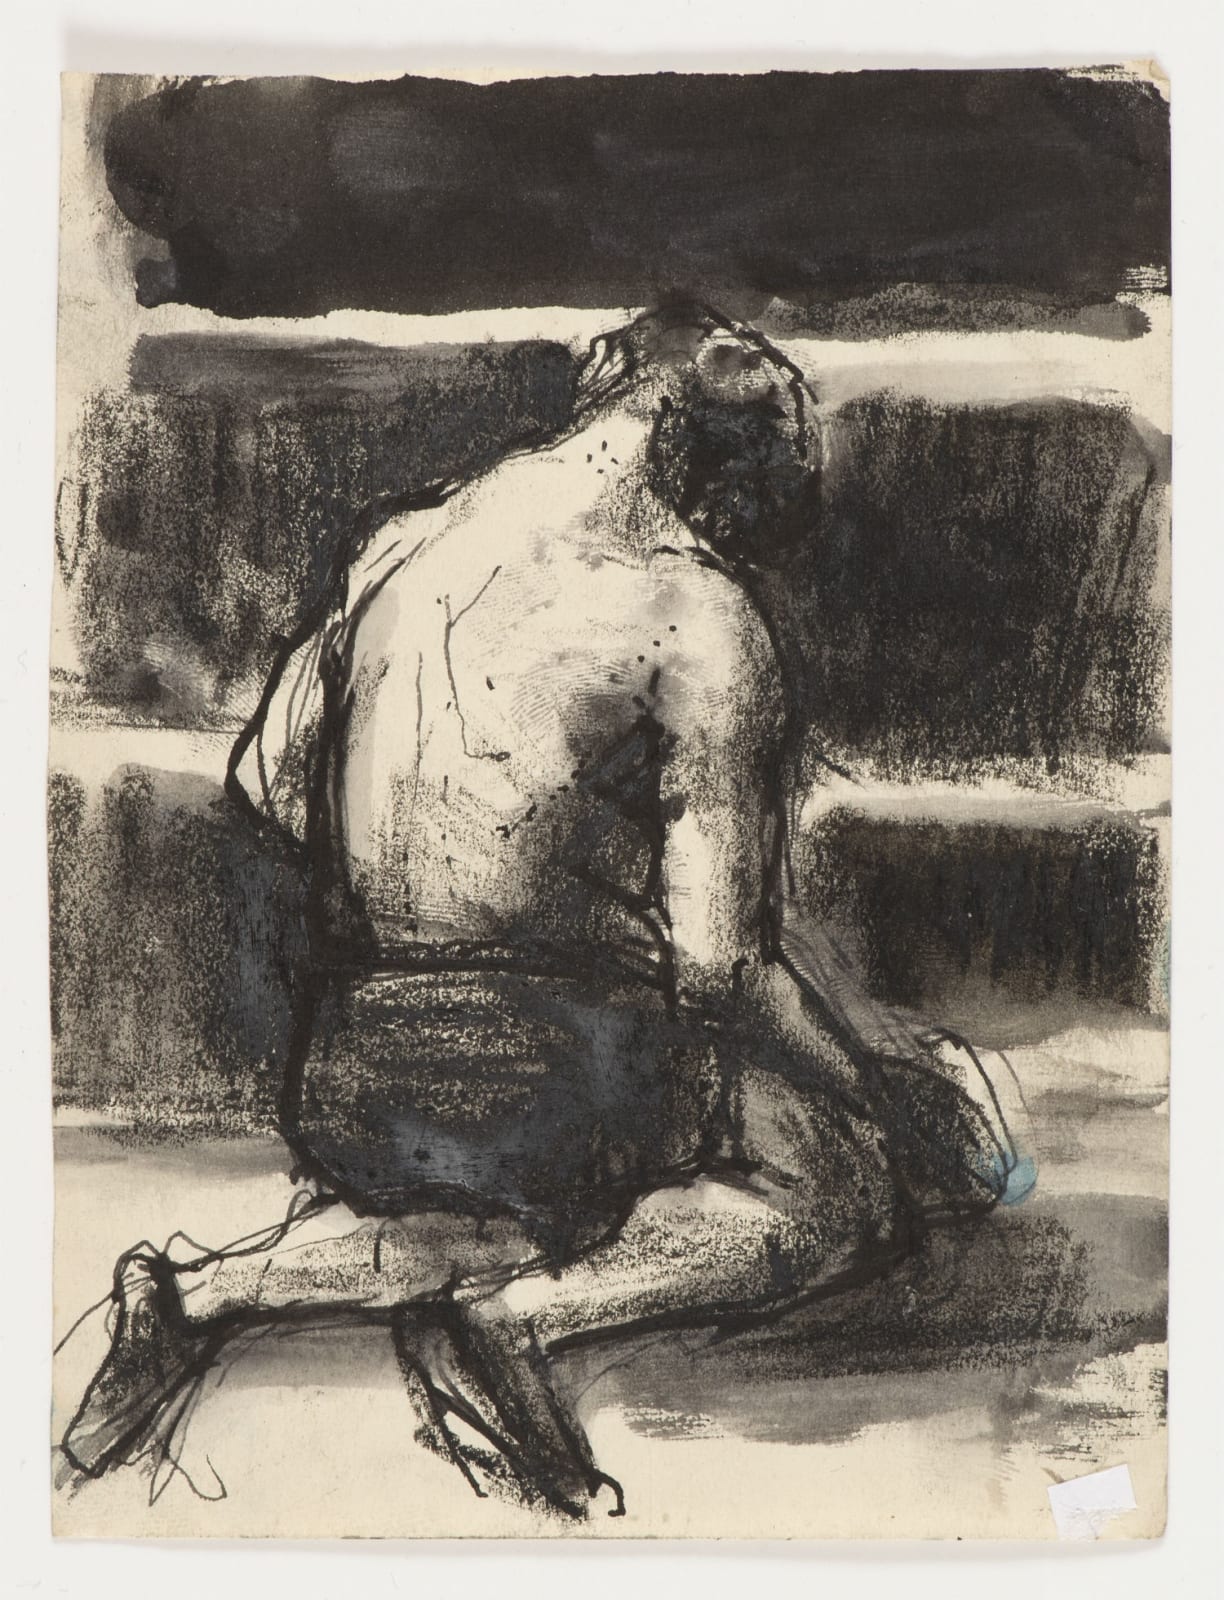 Eva Frankfurther (1930-1959) Boxer (Series of 8 Sketches from 'Whitechapel Diary') c.1951-56 Pen and ink and wash and charcoal on paper 13 x 19.8 cm Private Collection To see and discover more about this artist click here